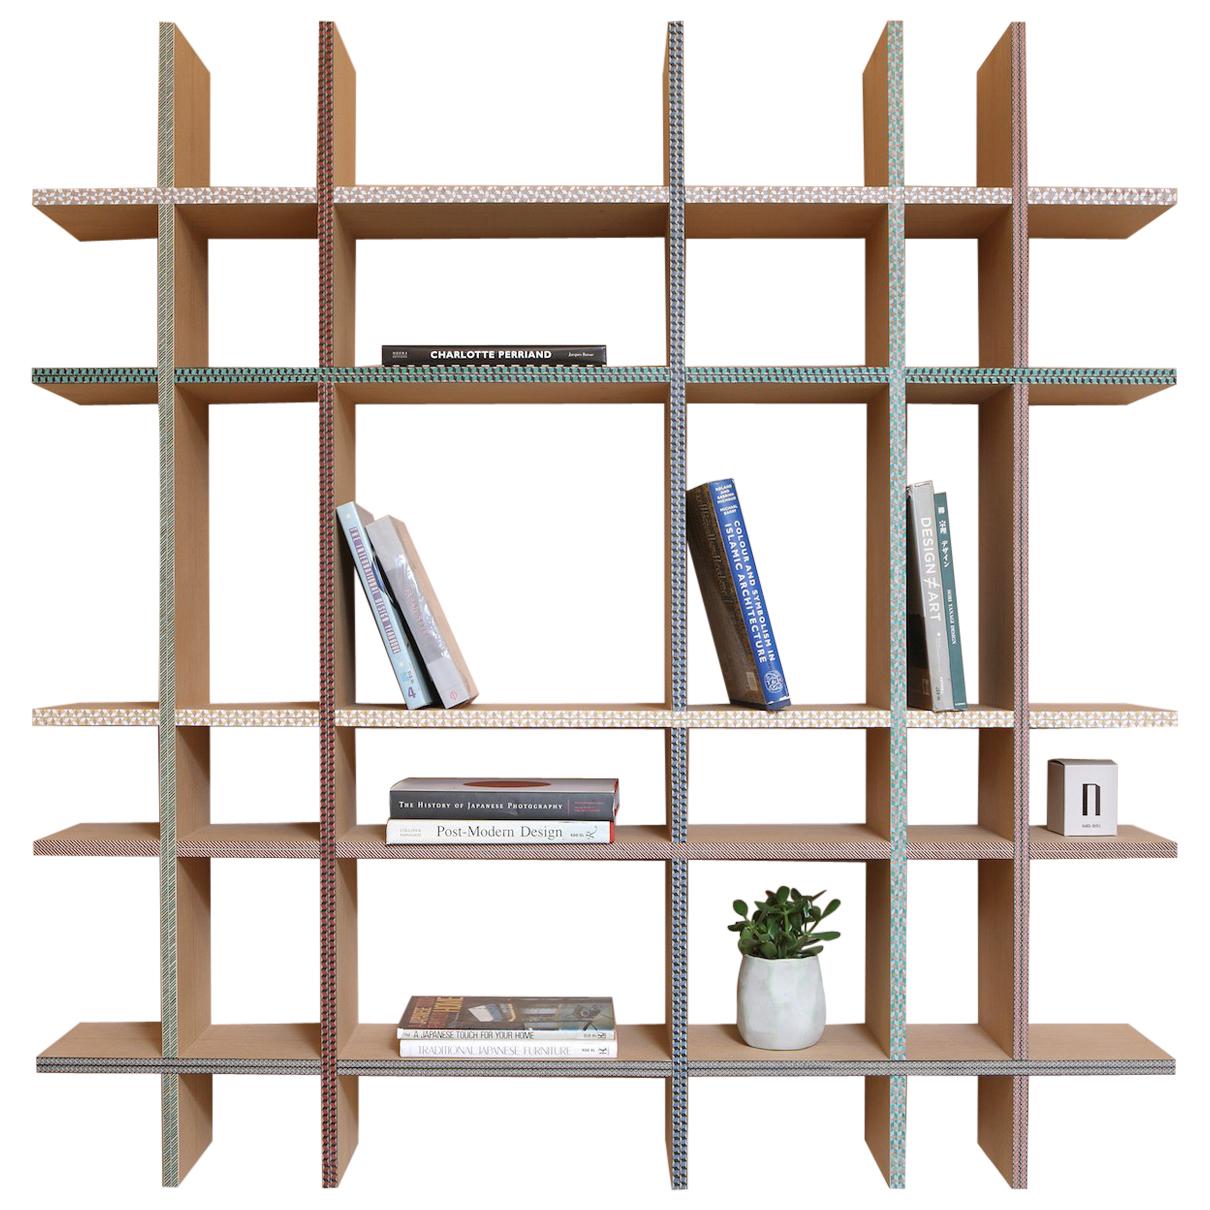 Funquetry Crisscross Shelf in oak wood with Middle Easter marquetry patterns For Sale